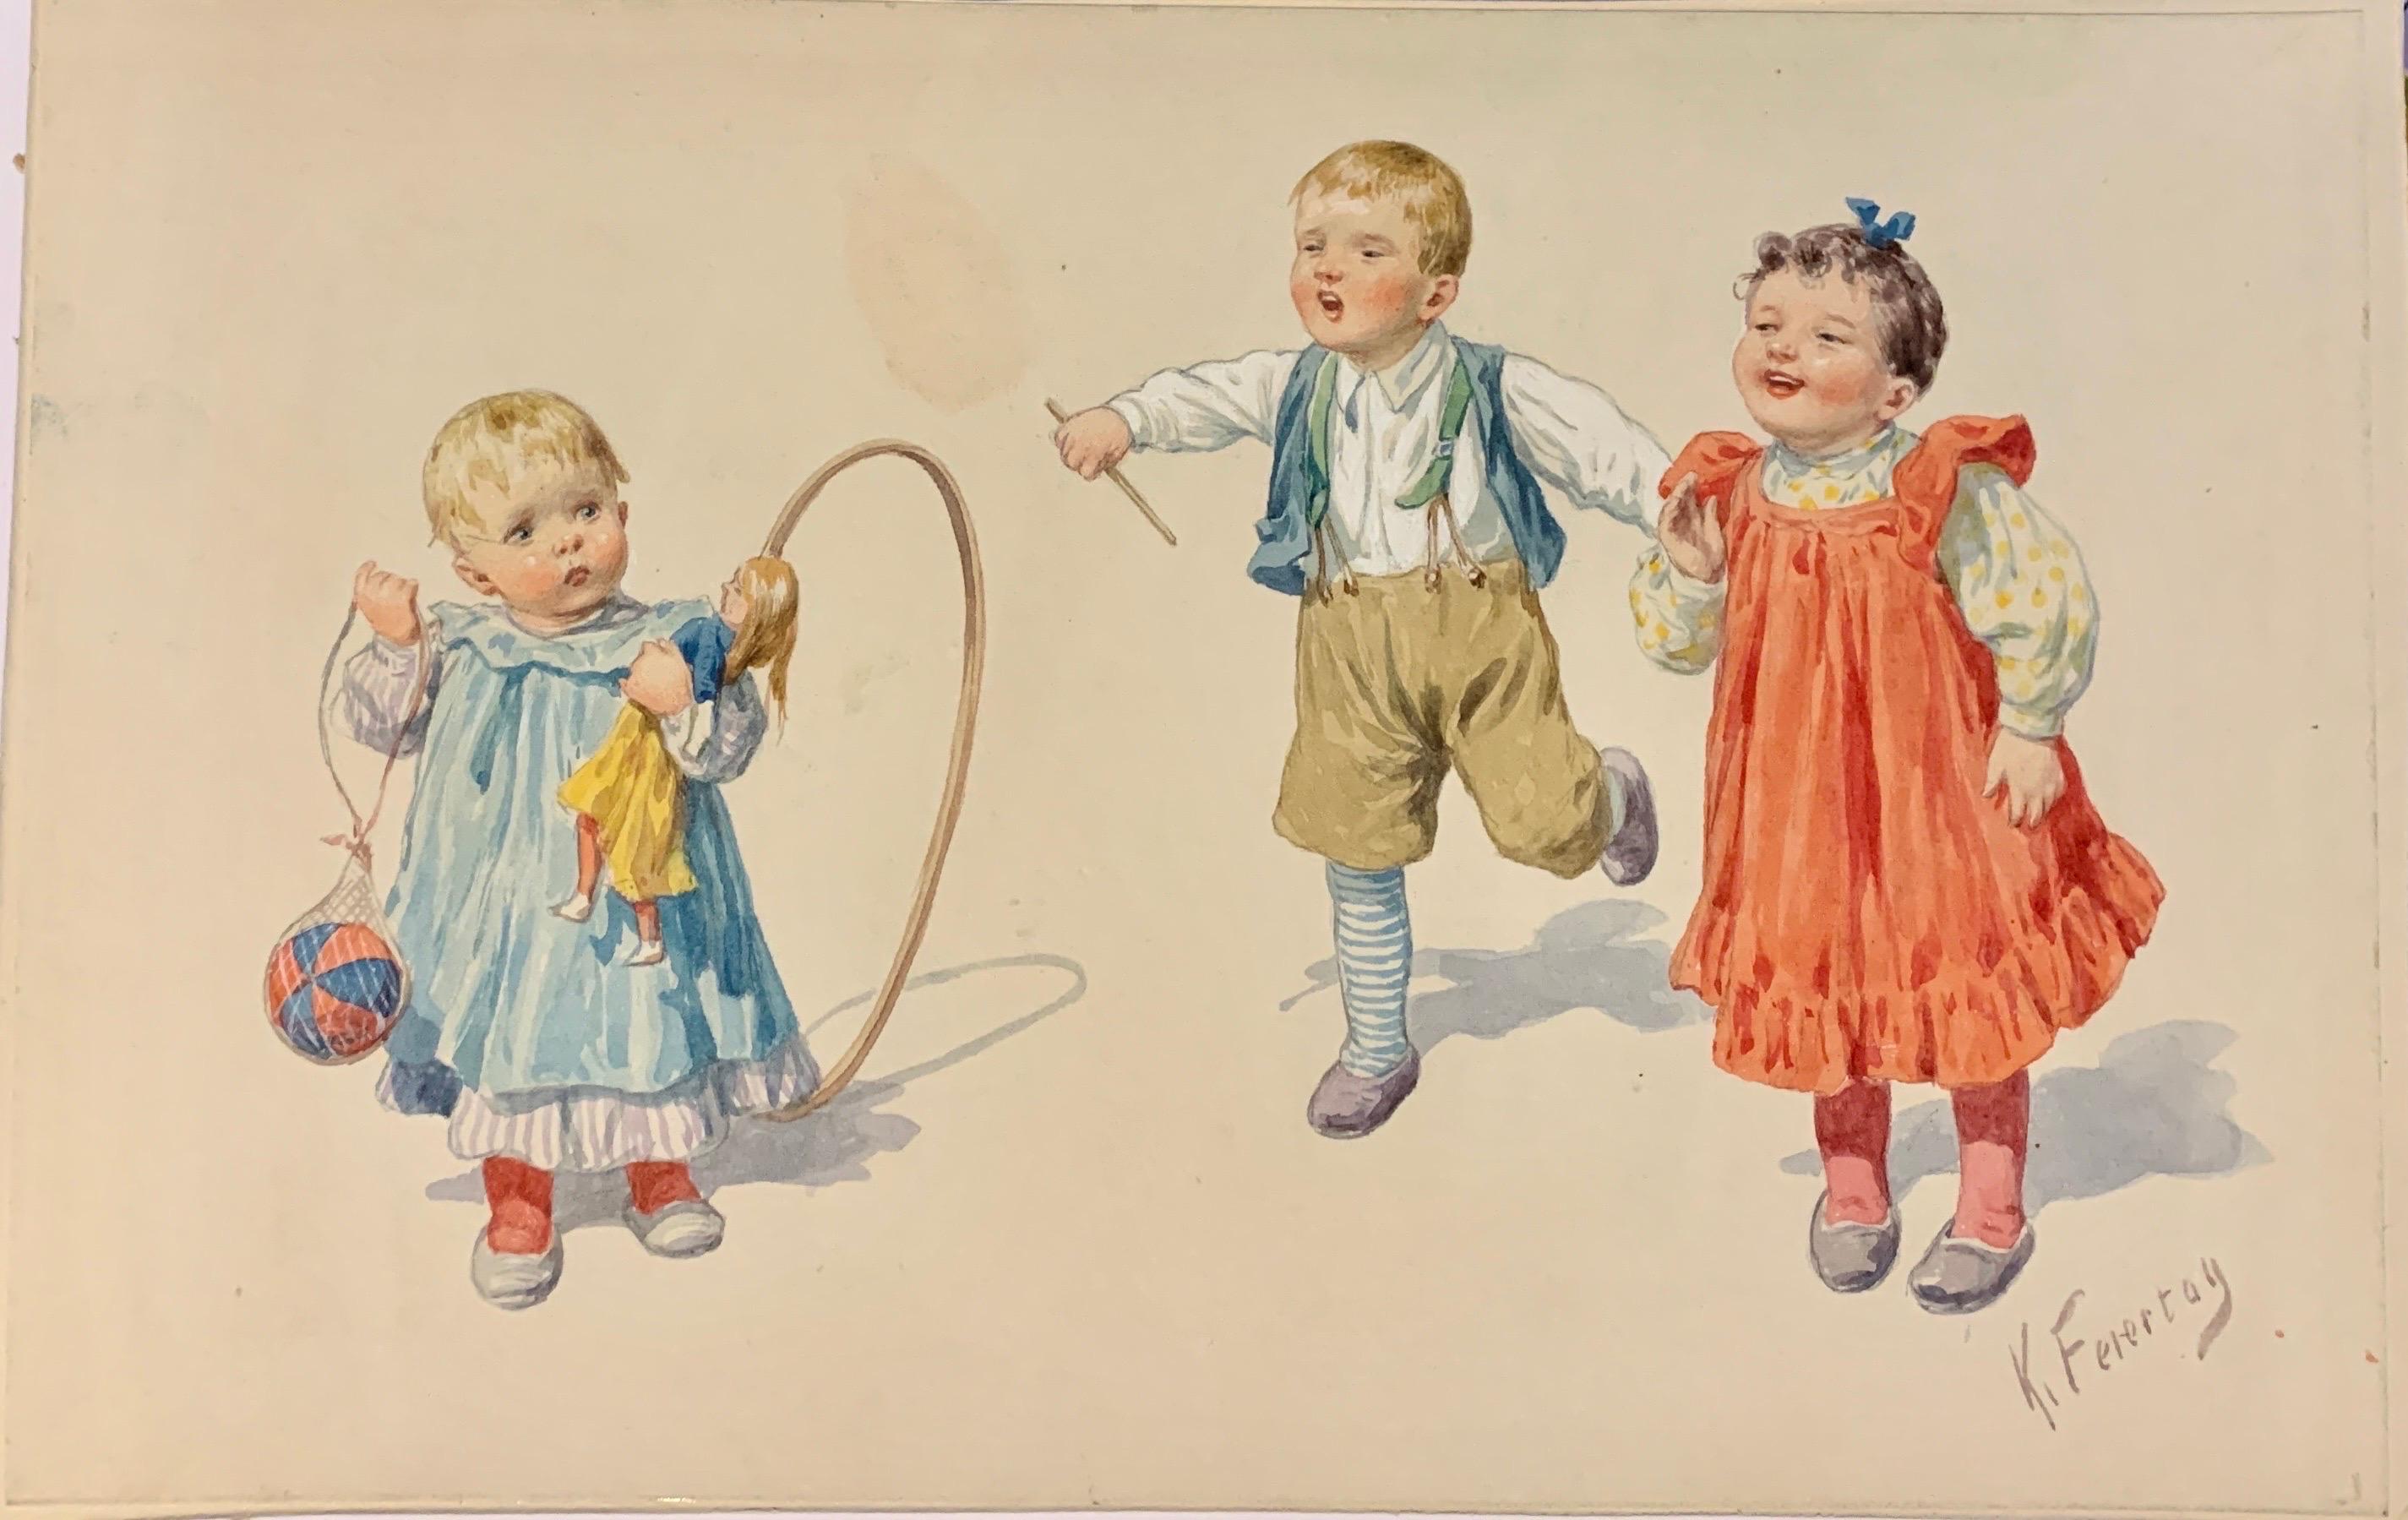 Karl Feiertag Figurative Art - Early 20th century German watercolor of children dancing in traditional dress